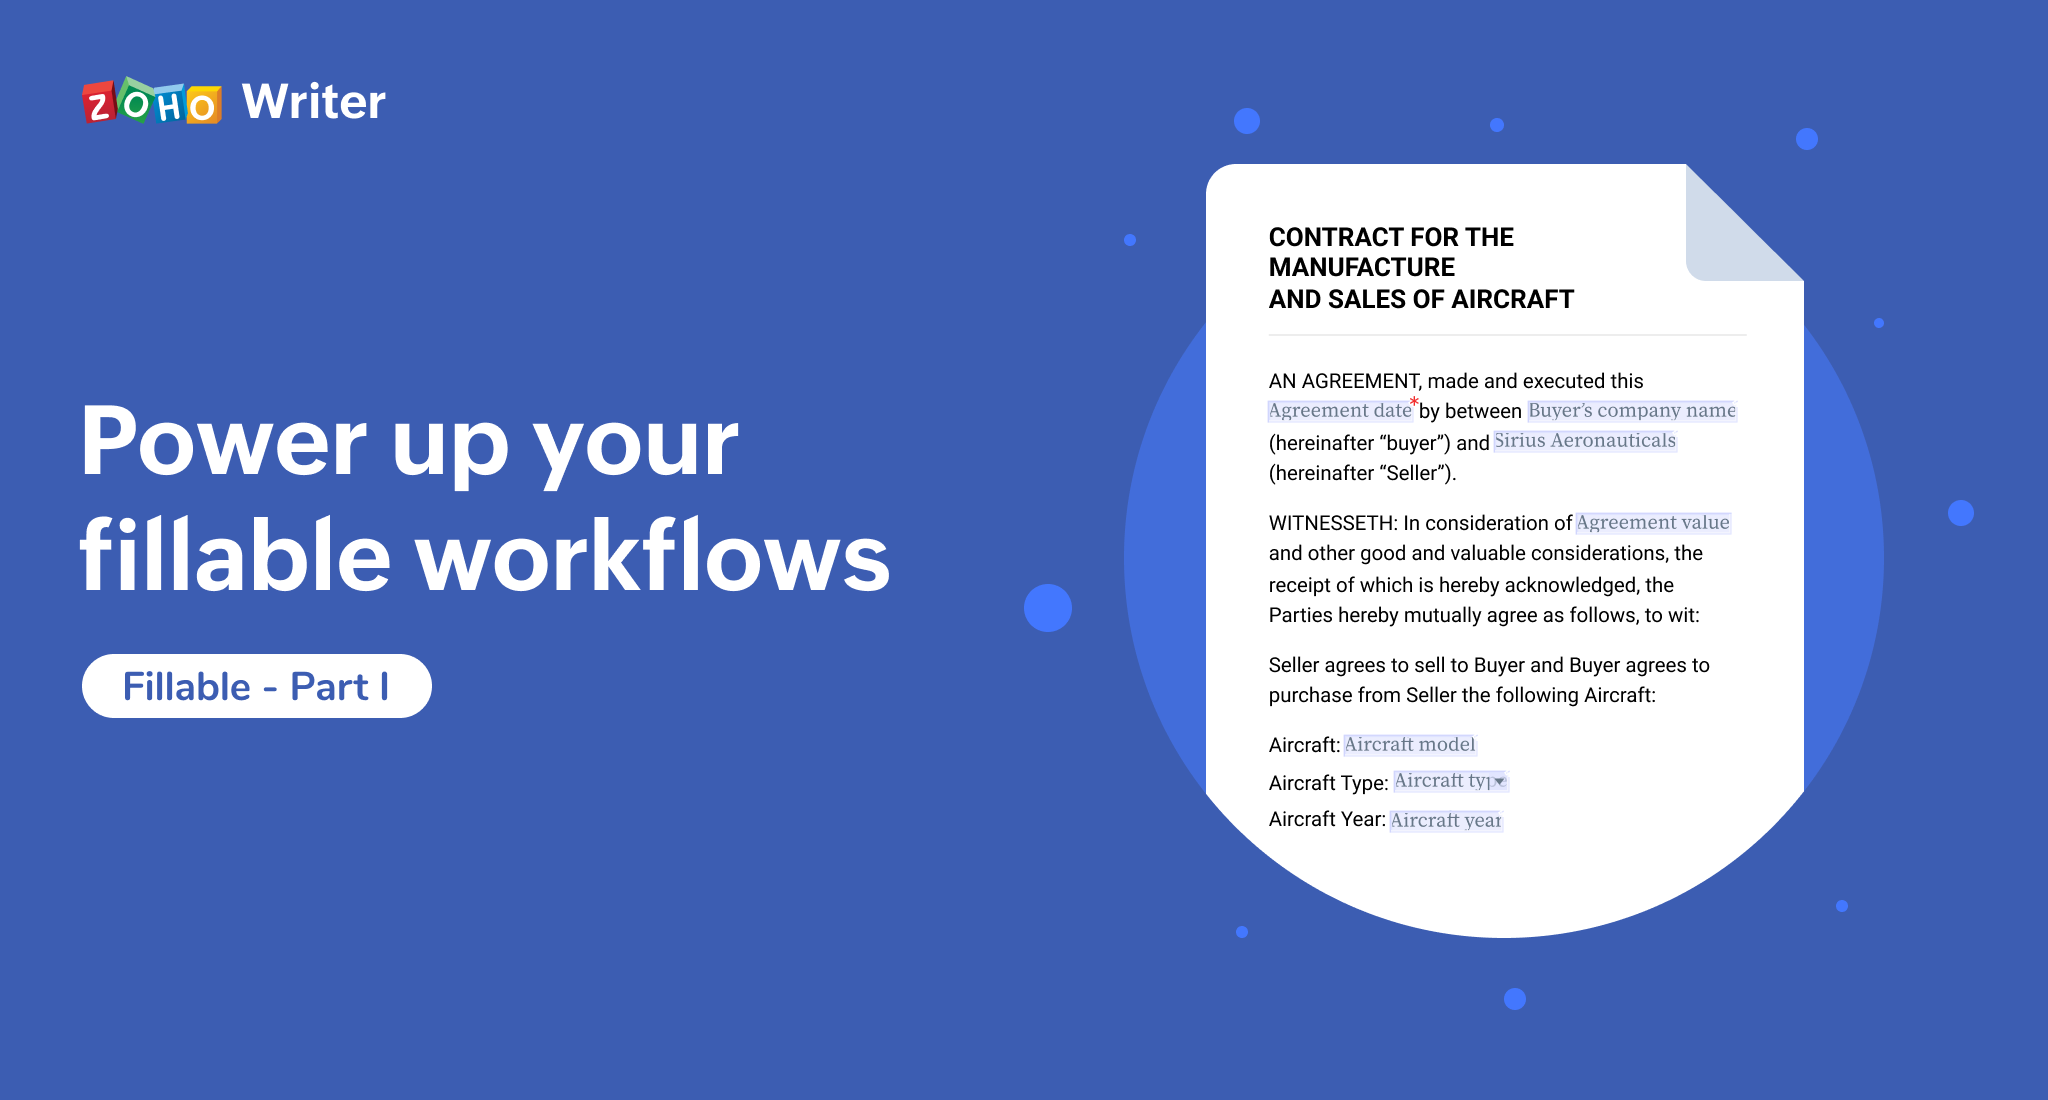 Power up your fillable workflows